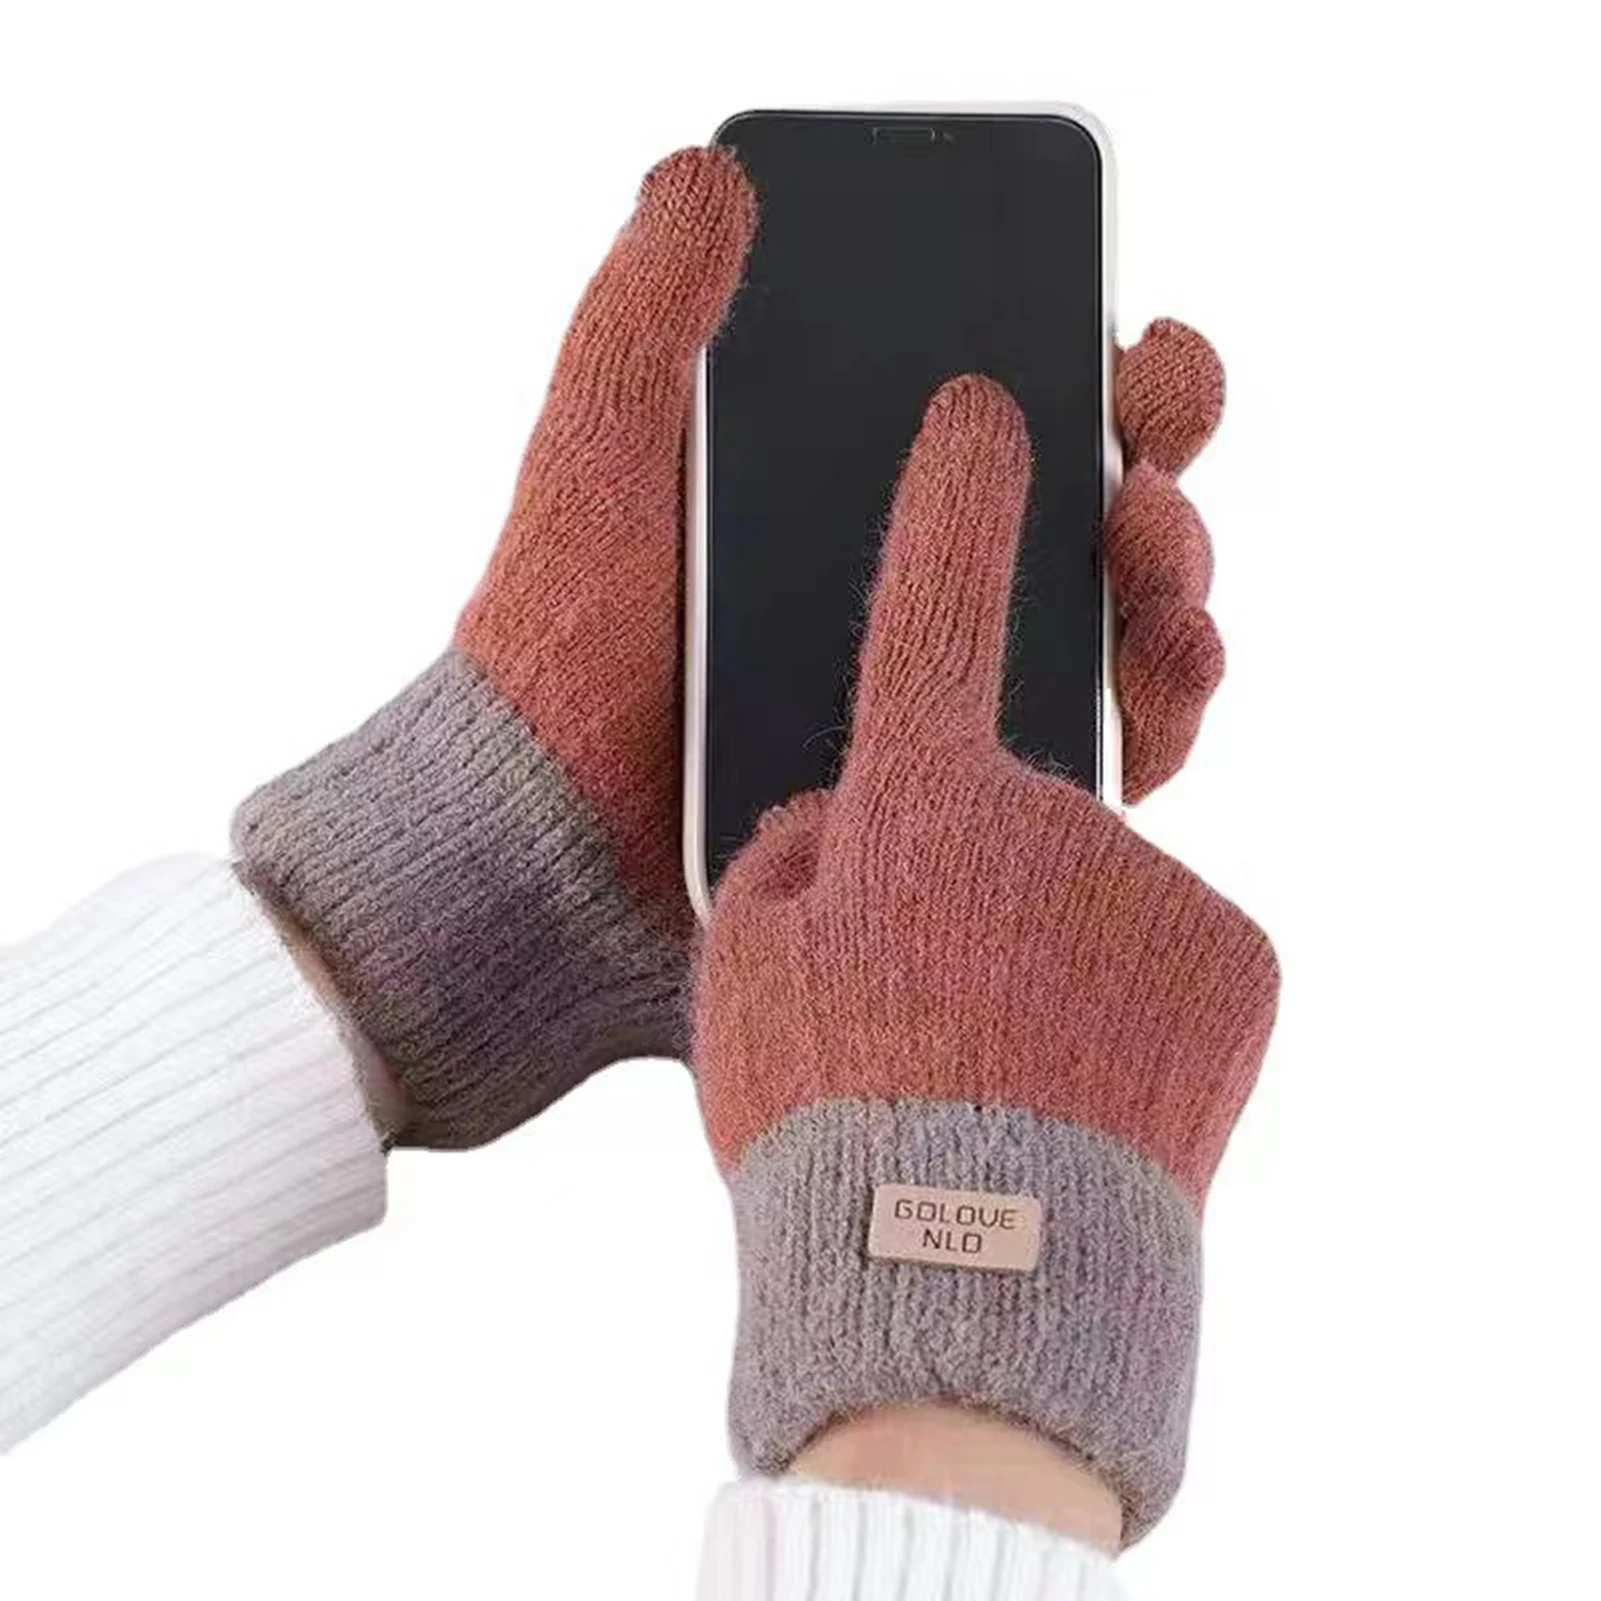 

Unisex Cable Knit Winter Gloves Warm Fleece Lined Knit Gloves with Touchscreen for Cold Weather Protect Hands